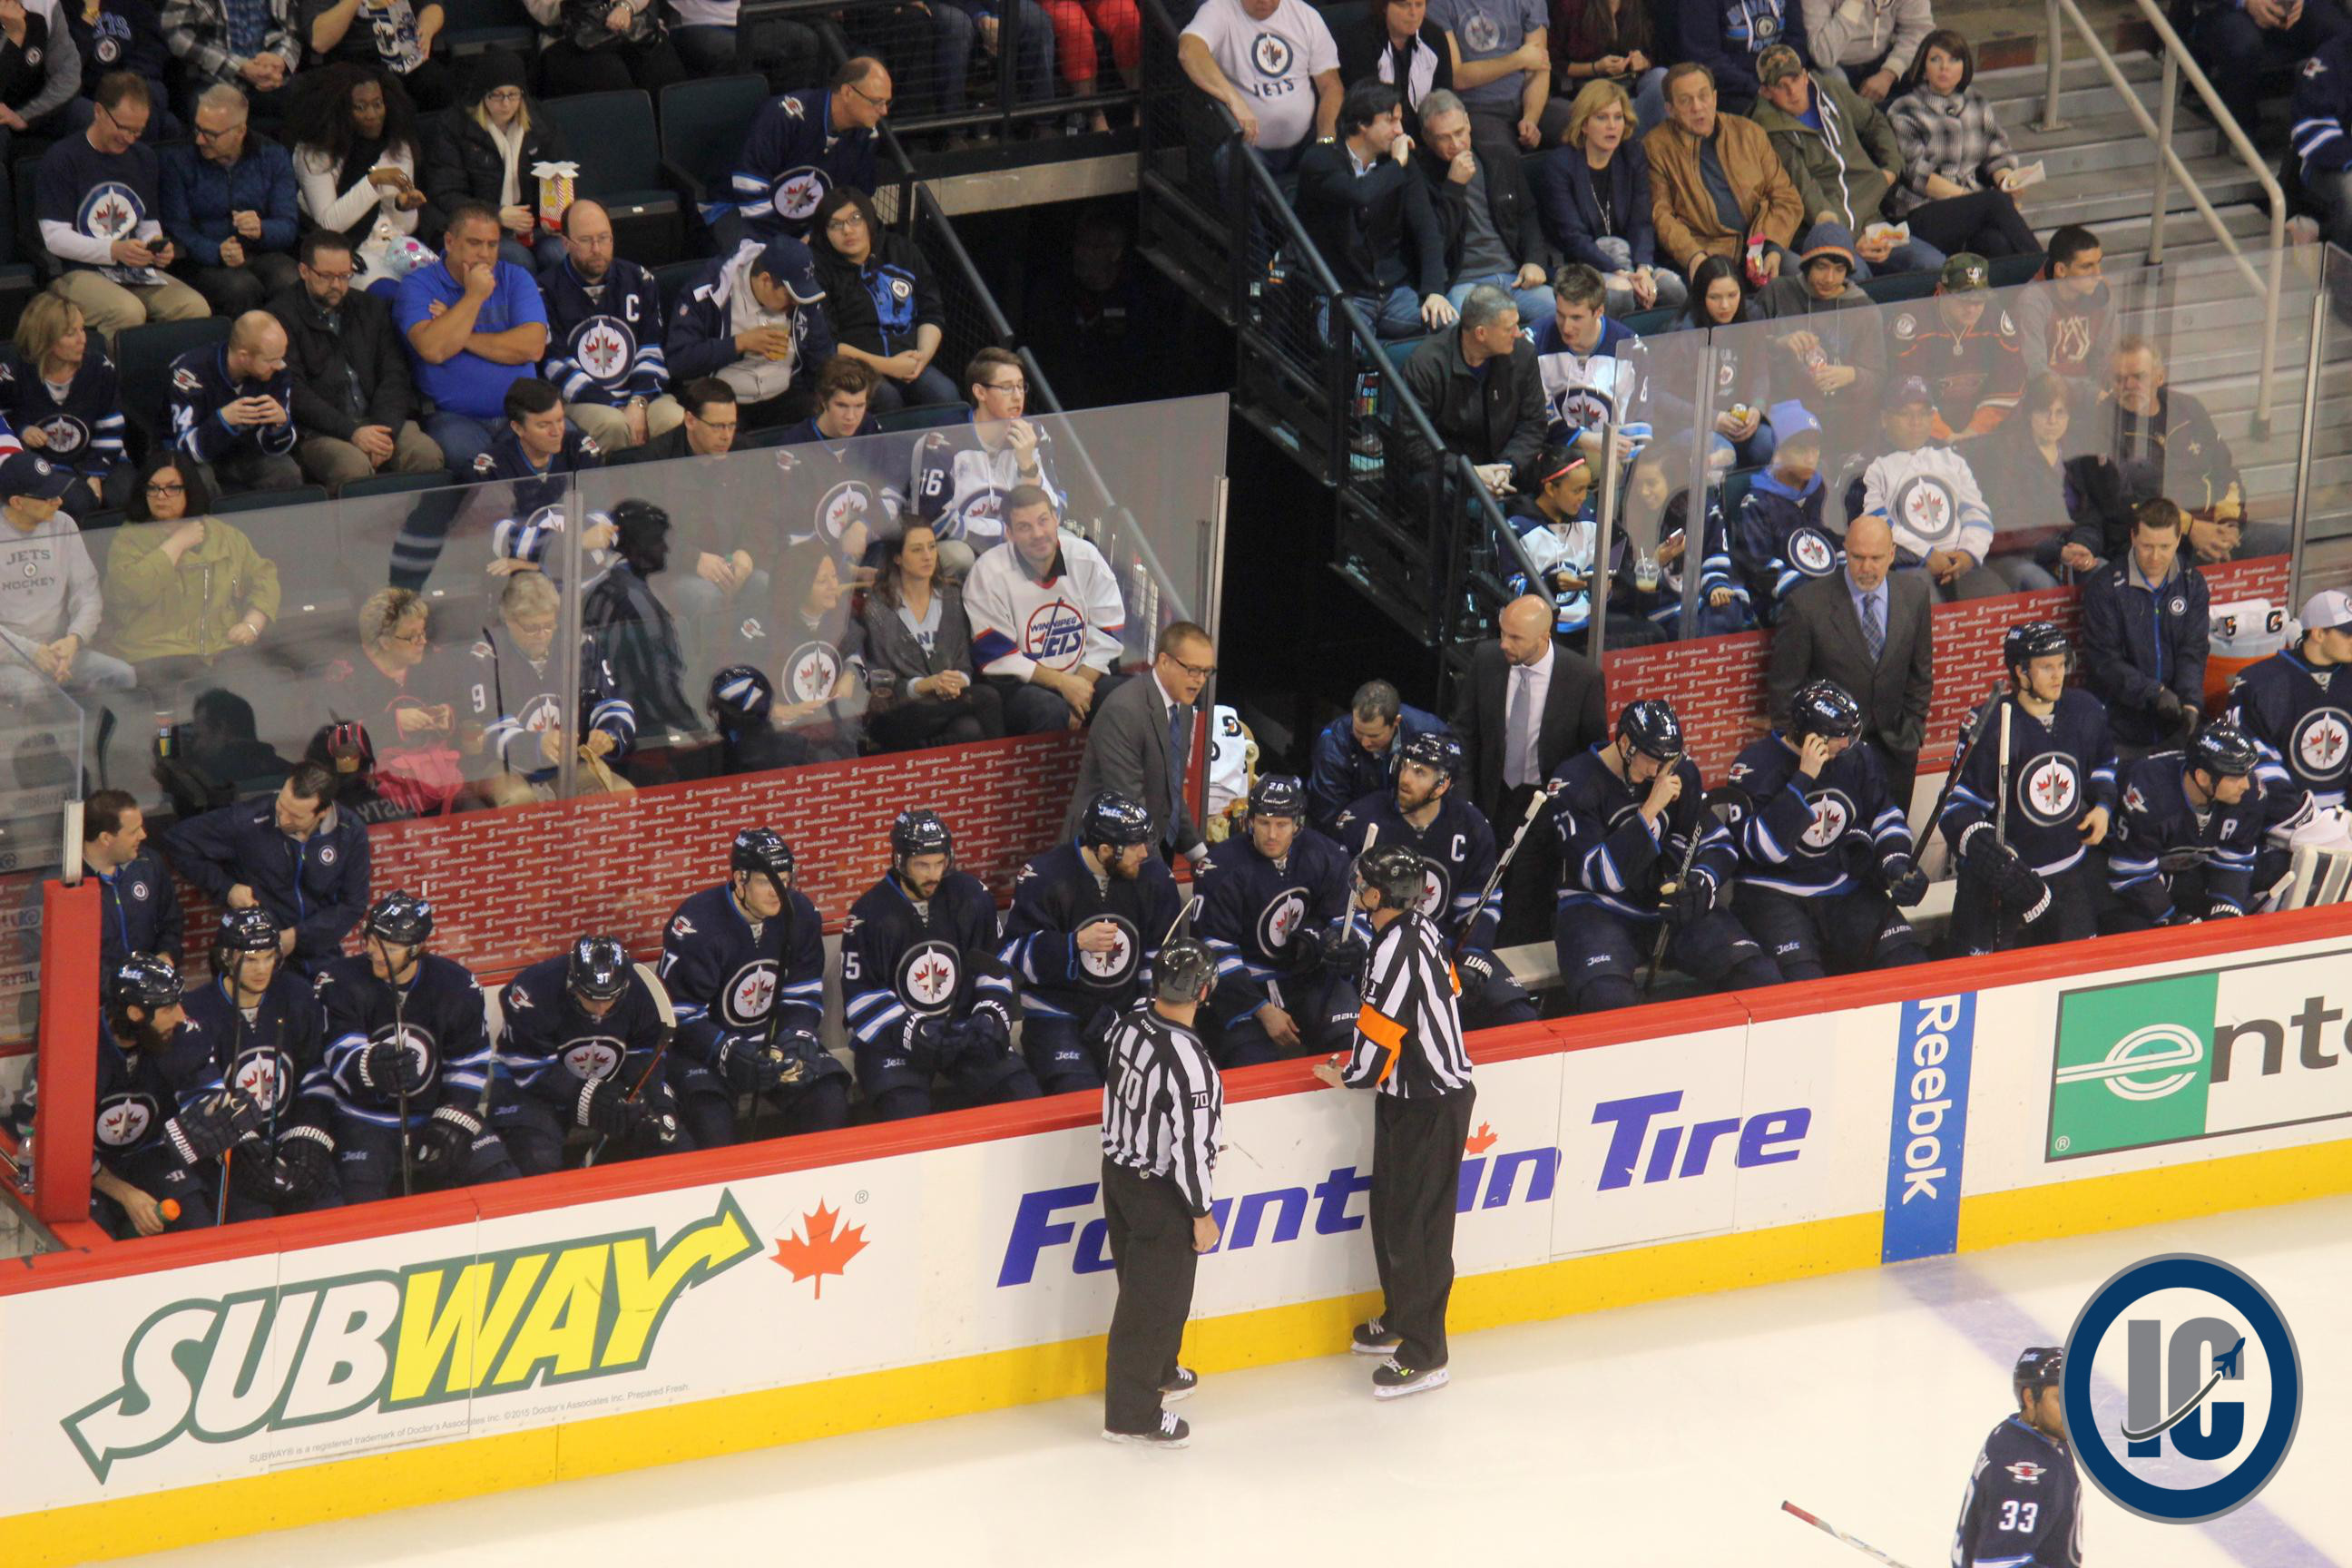 Jets bench March 31